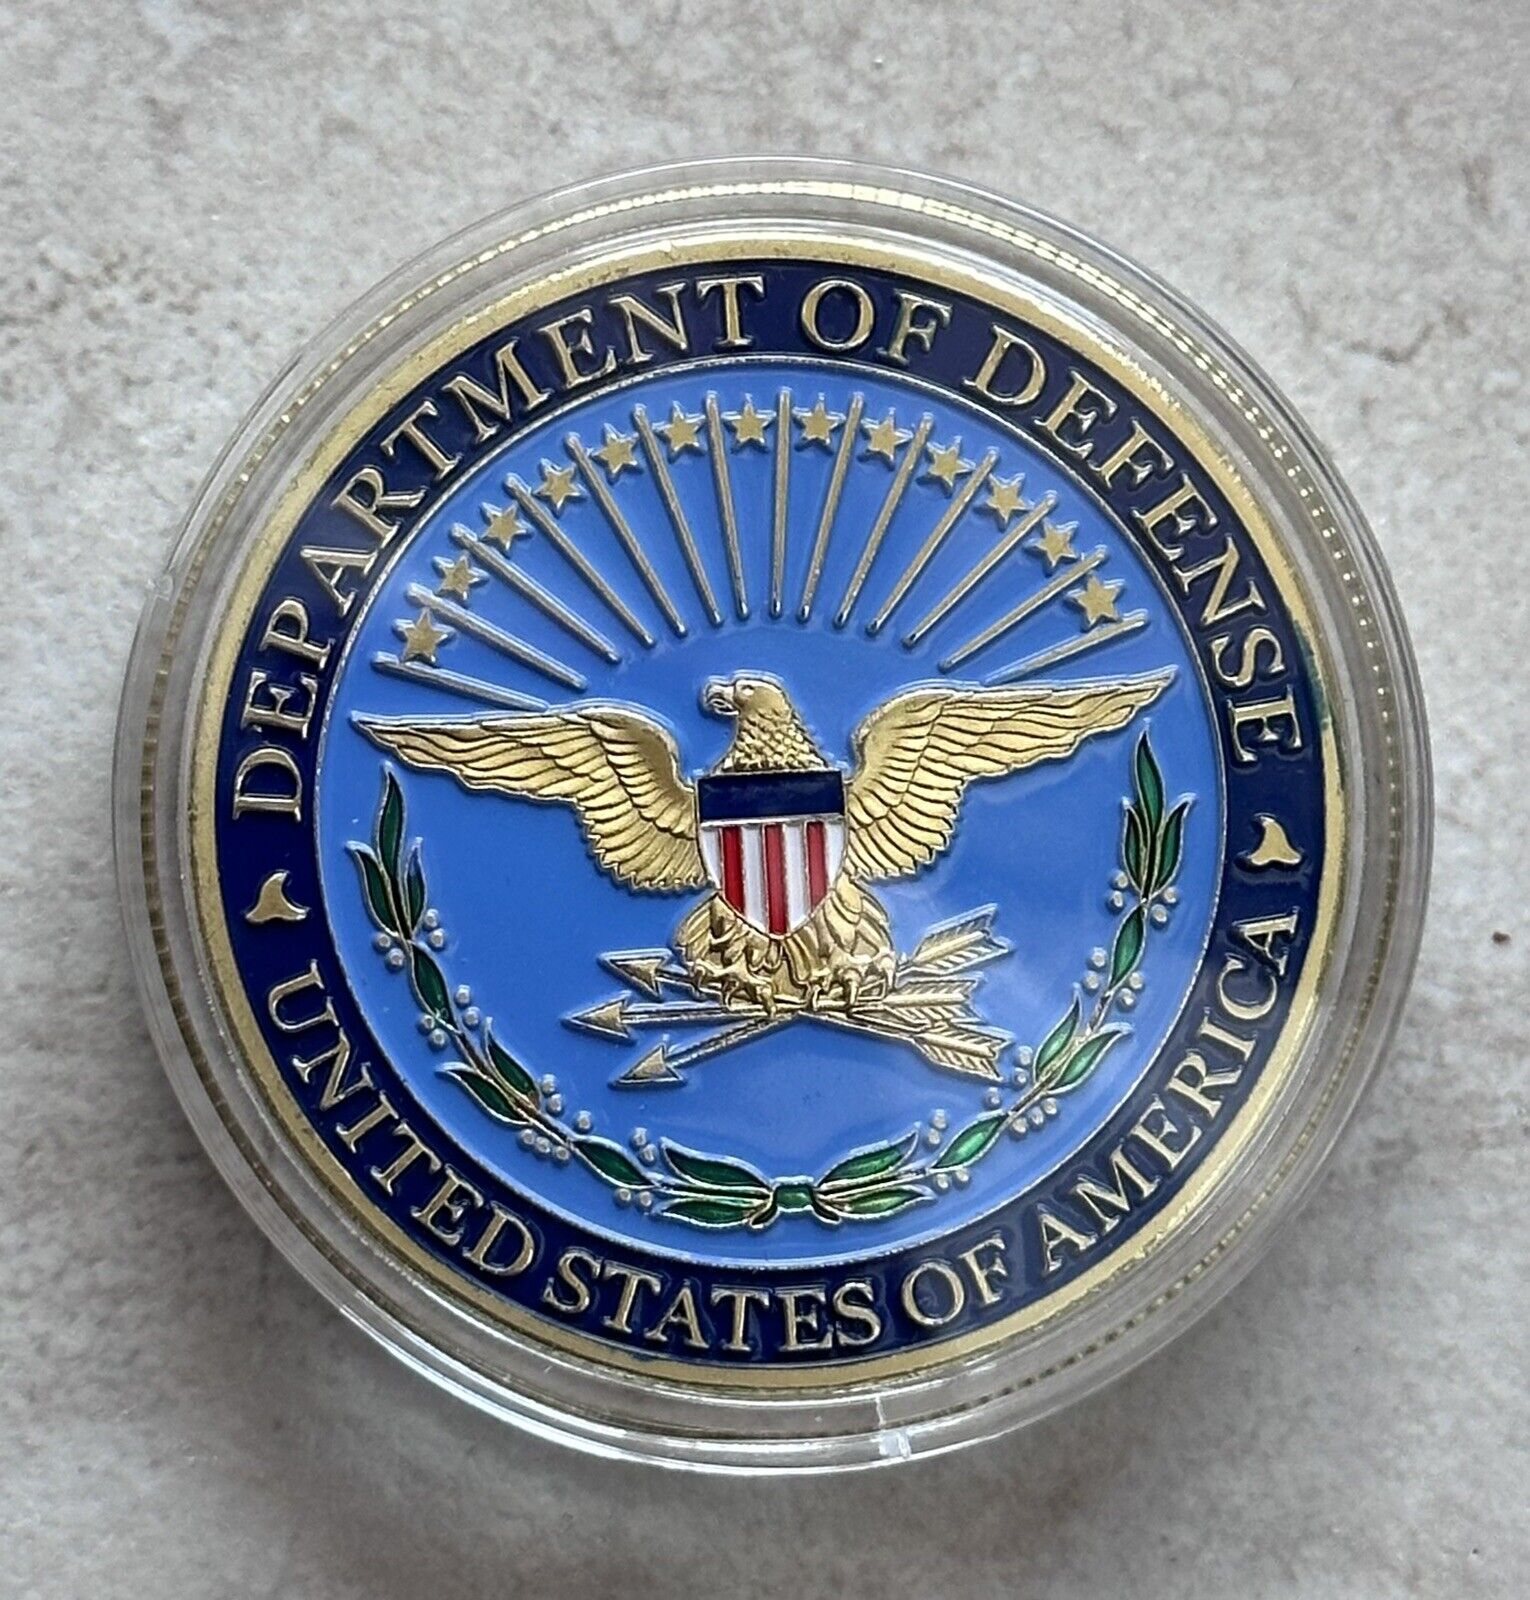 United States Department of Defense Challenge Coin 